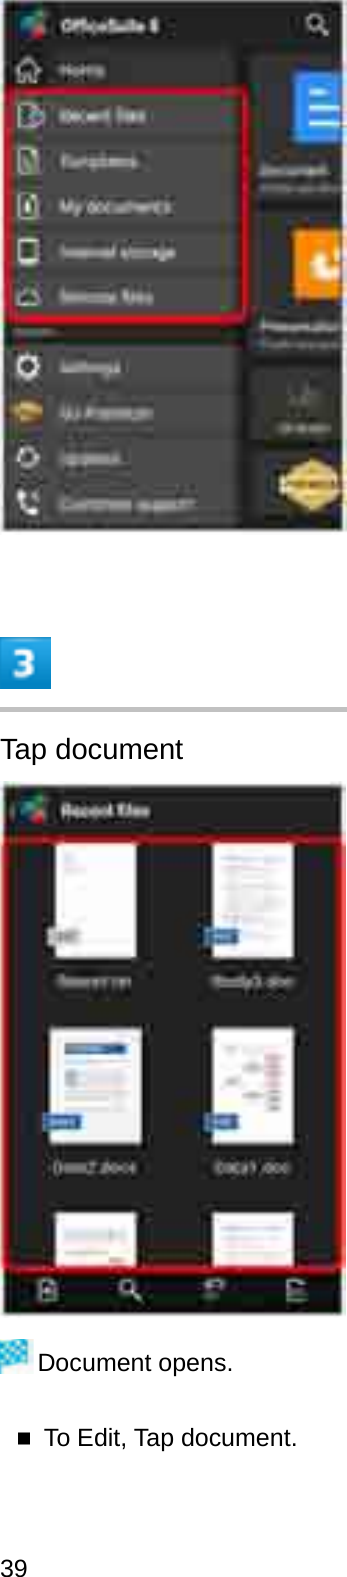 Tap documentDocument opens.To Edit, Tap document.39